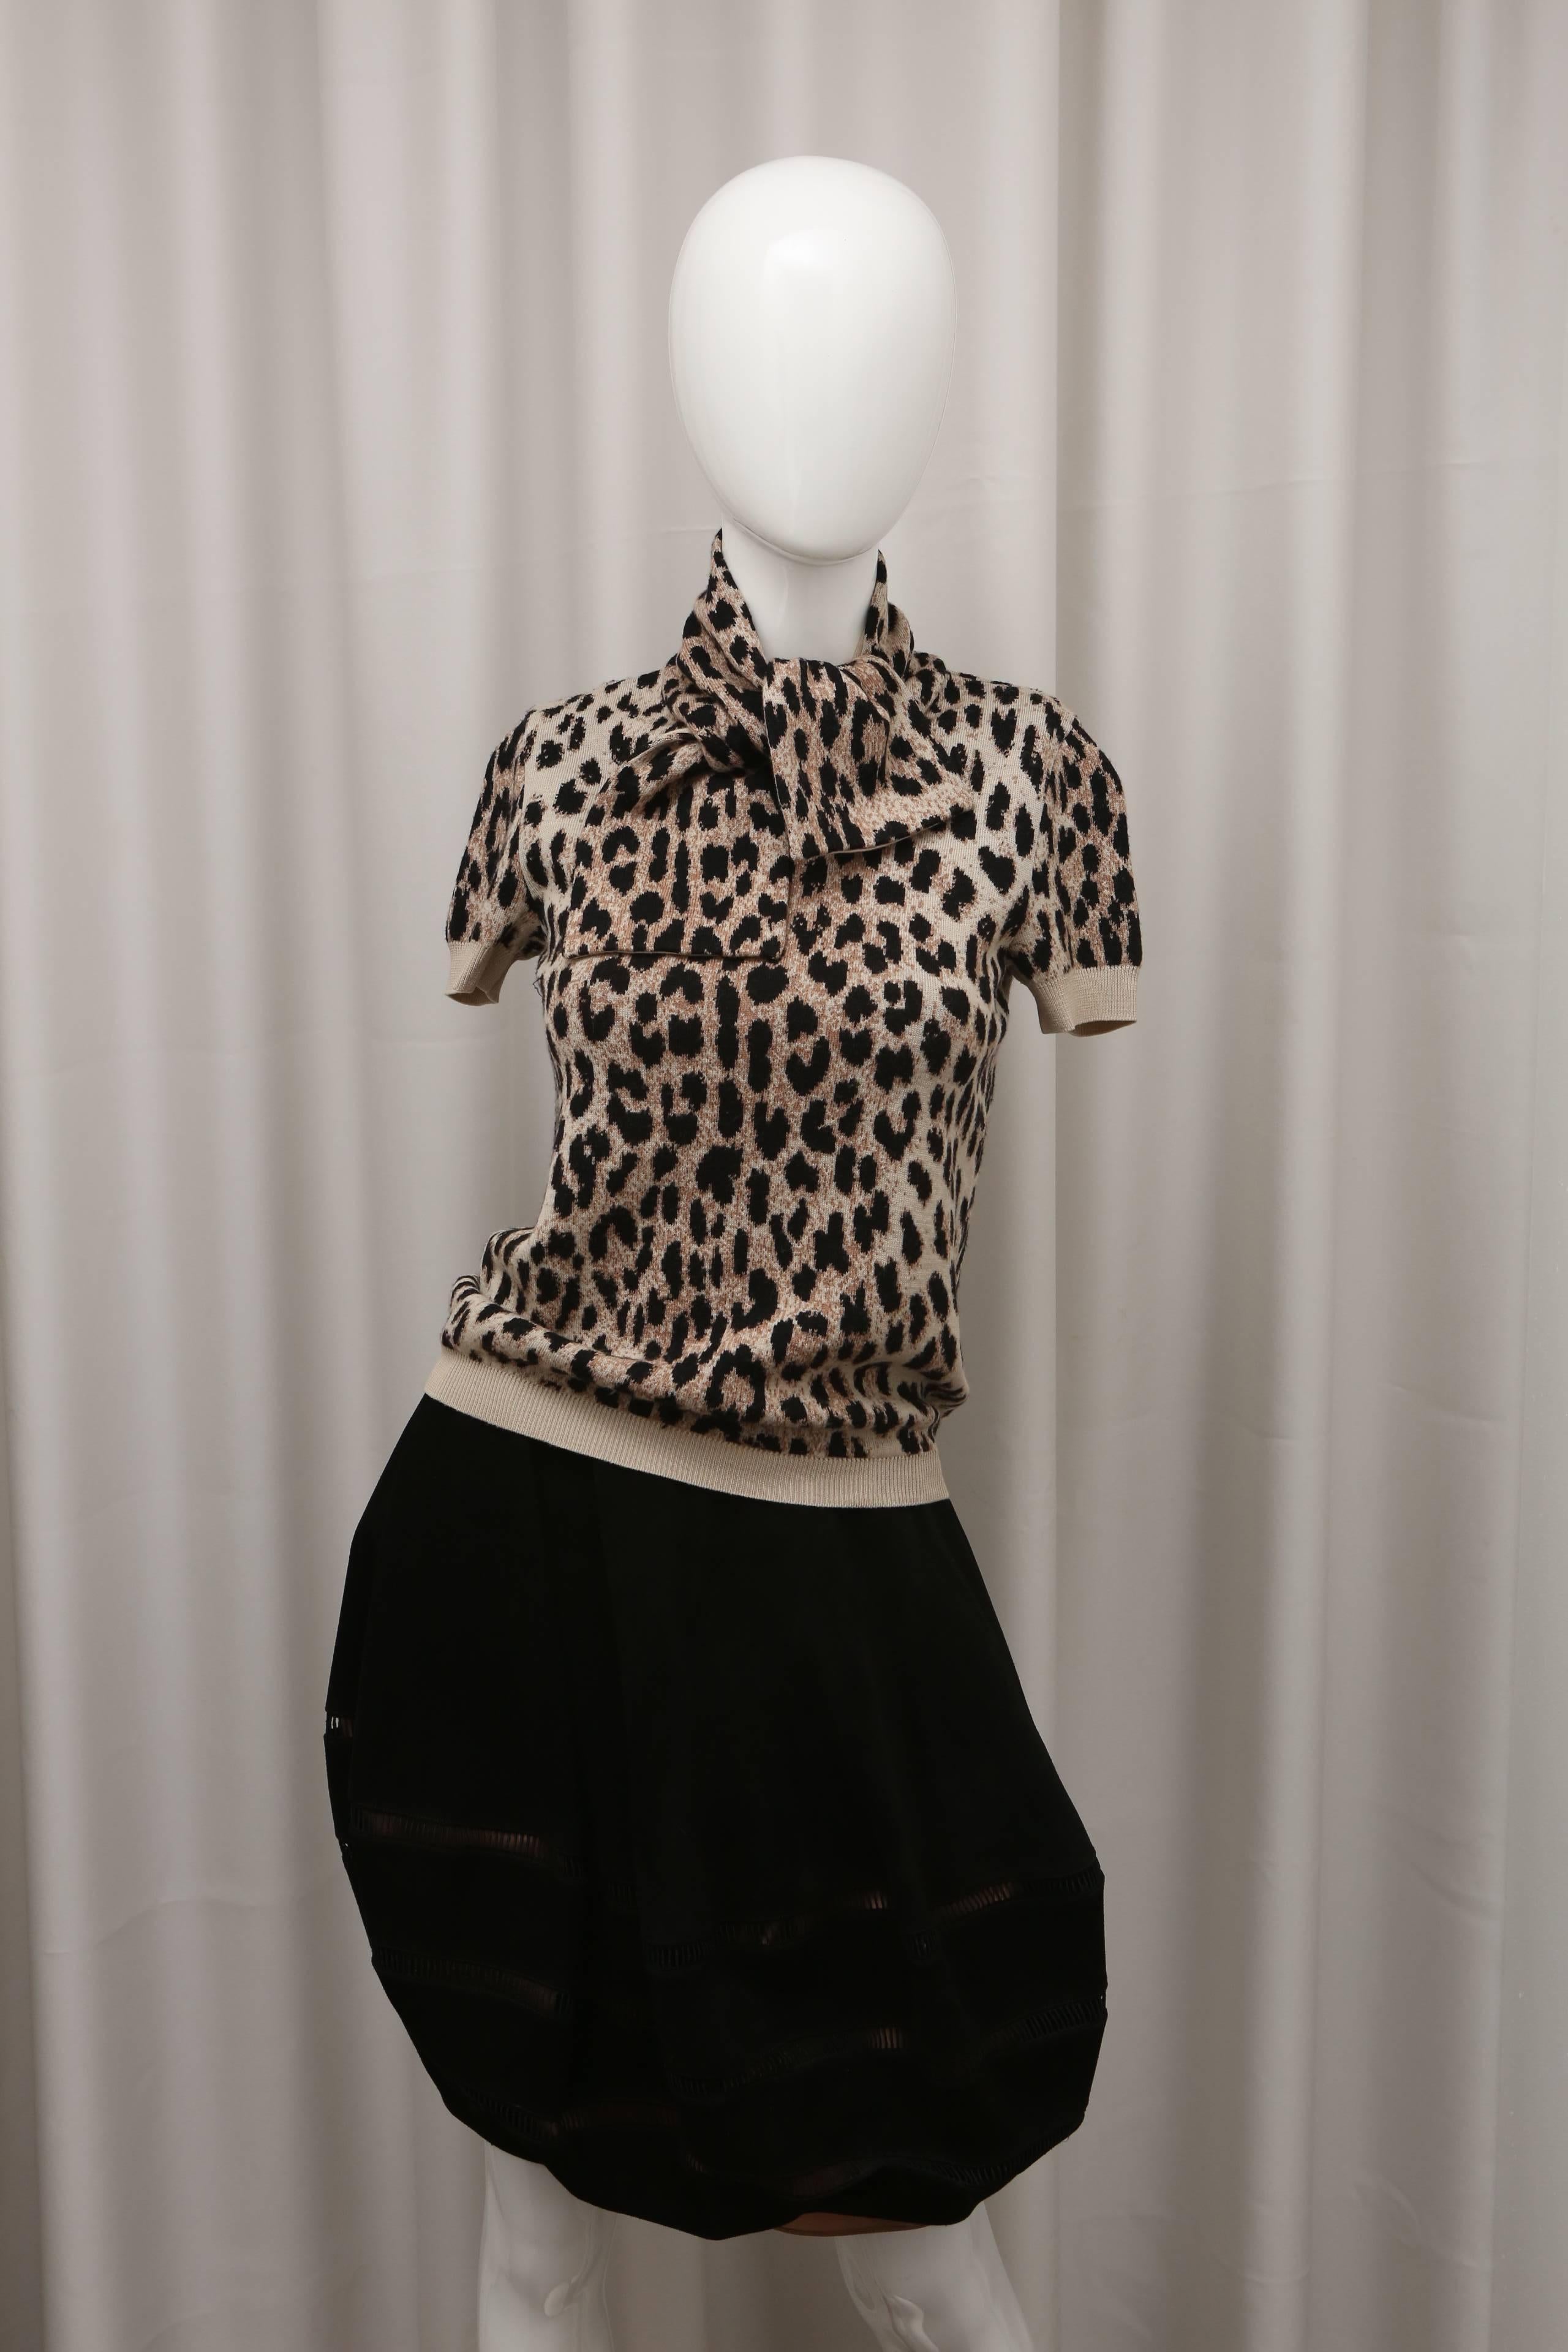 Leopard print brown cashmere sweater with collar.